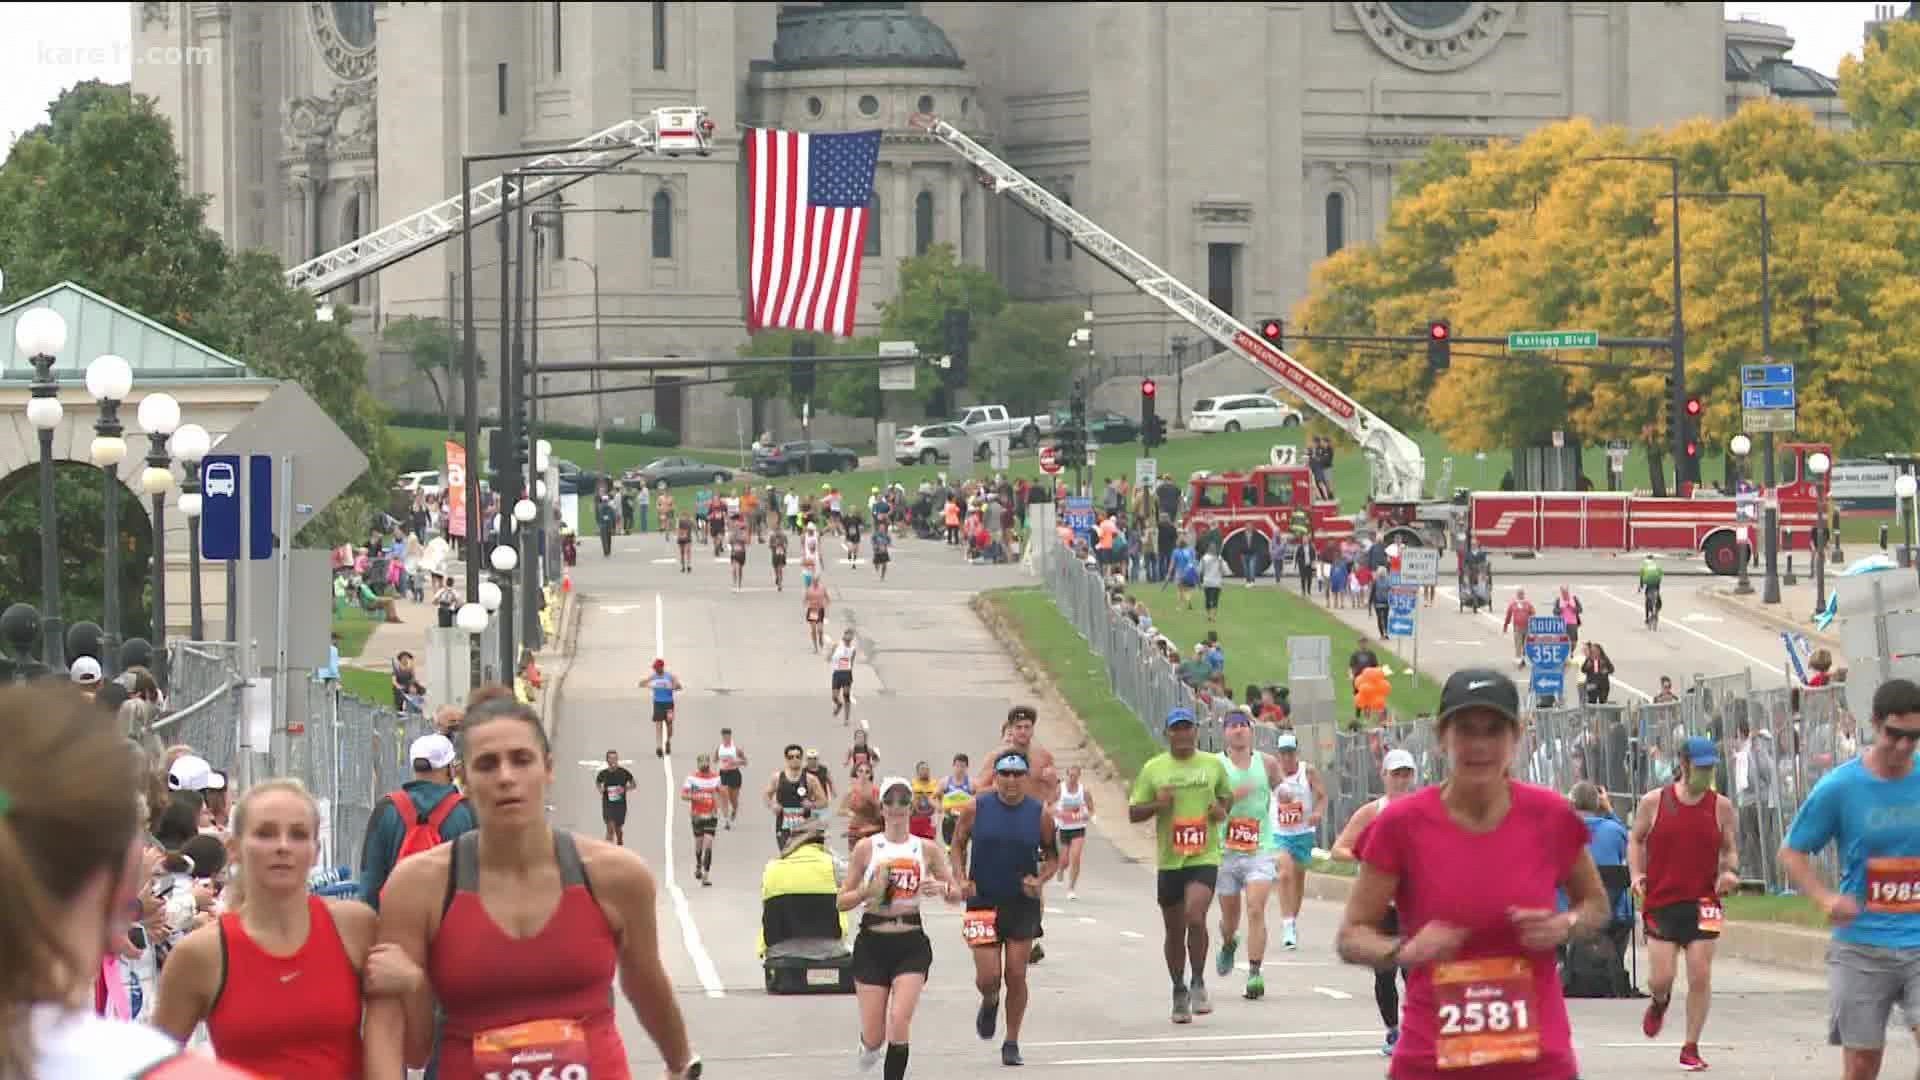 Runners returned for an in-person race weekend, culminating in a full marathon that featured about 4,500 participants.